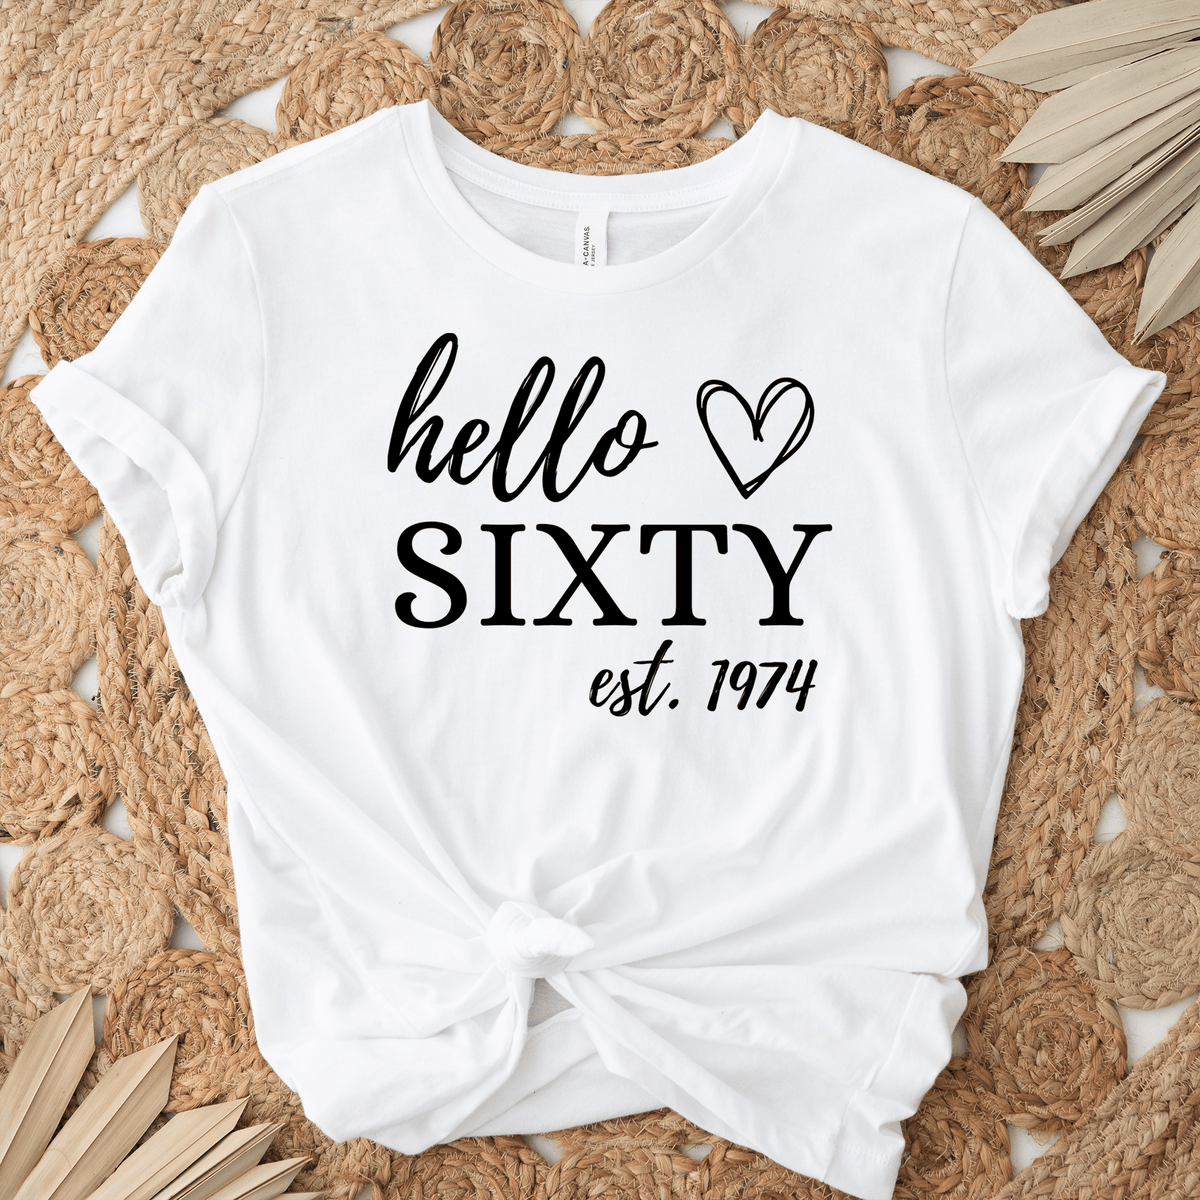 Womens White T Shirt with Hello-Sixty design